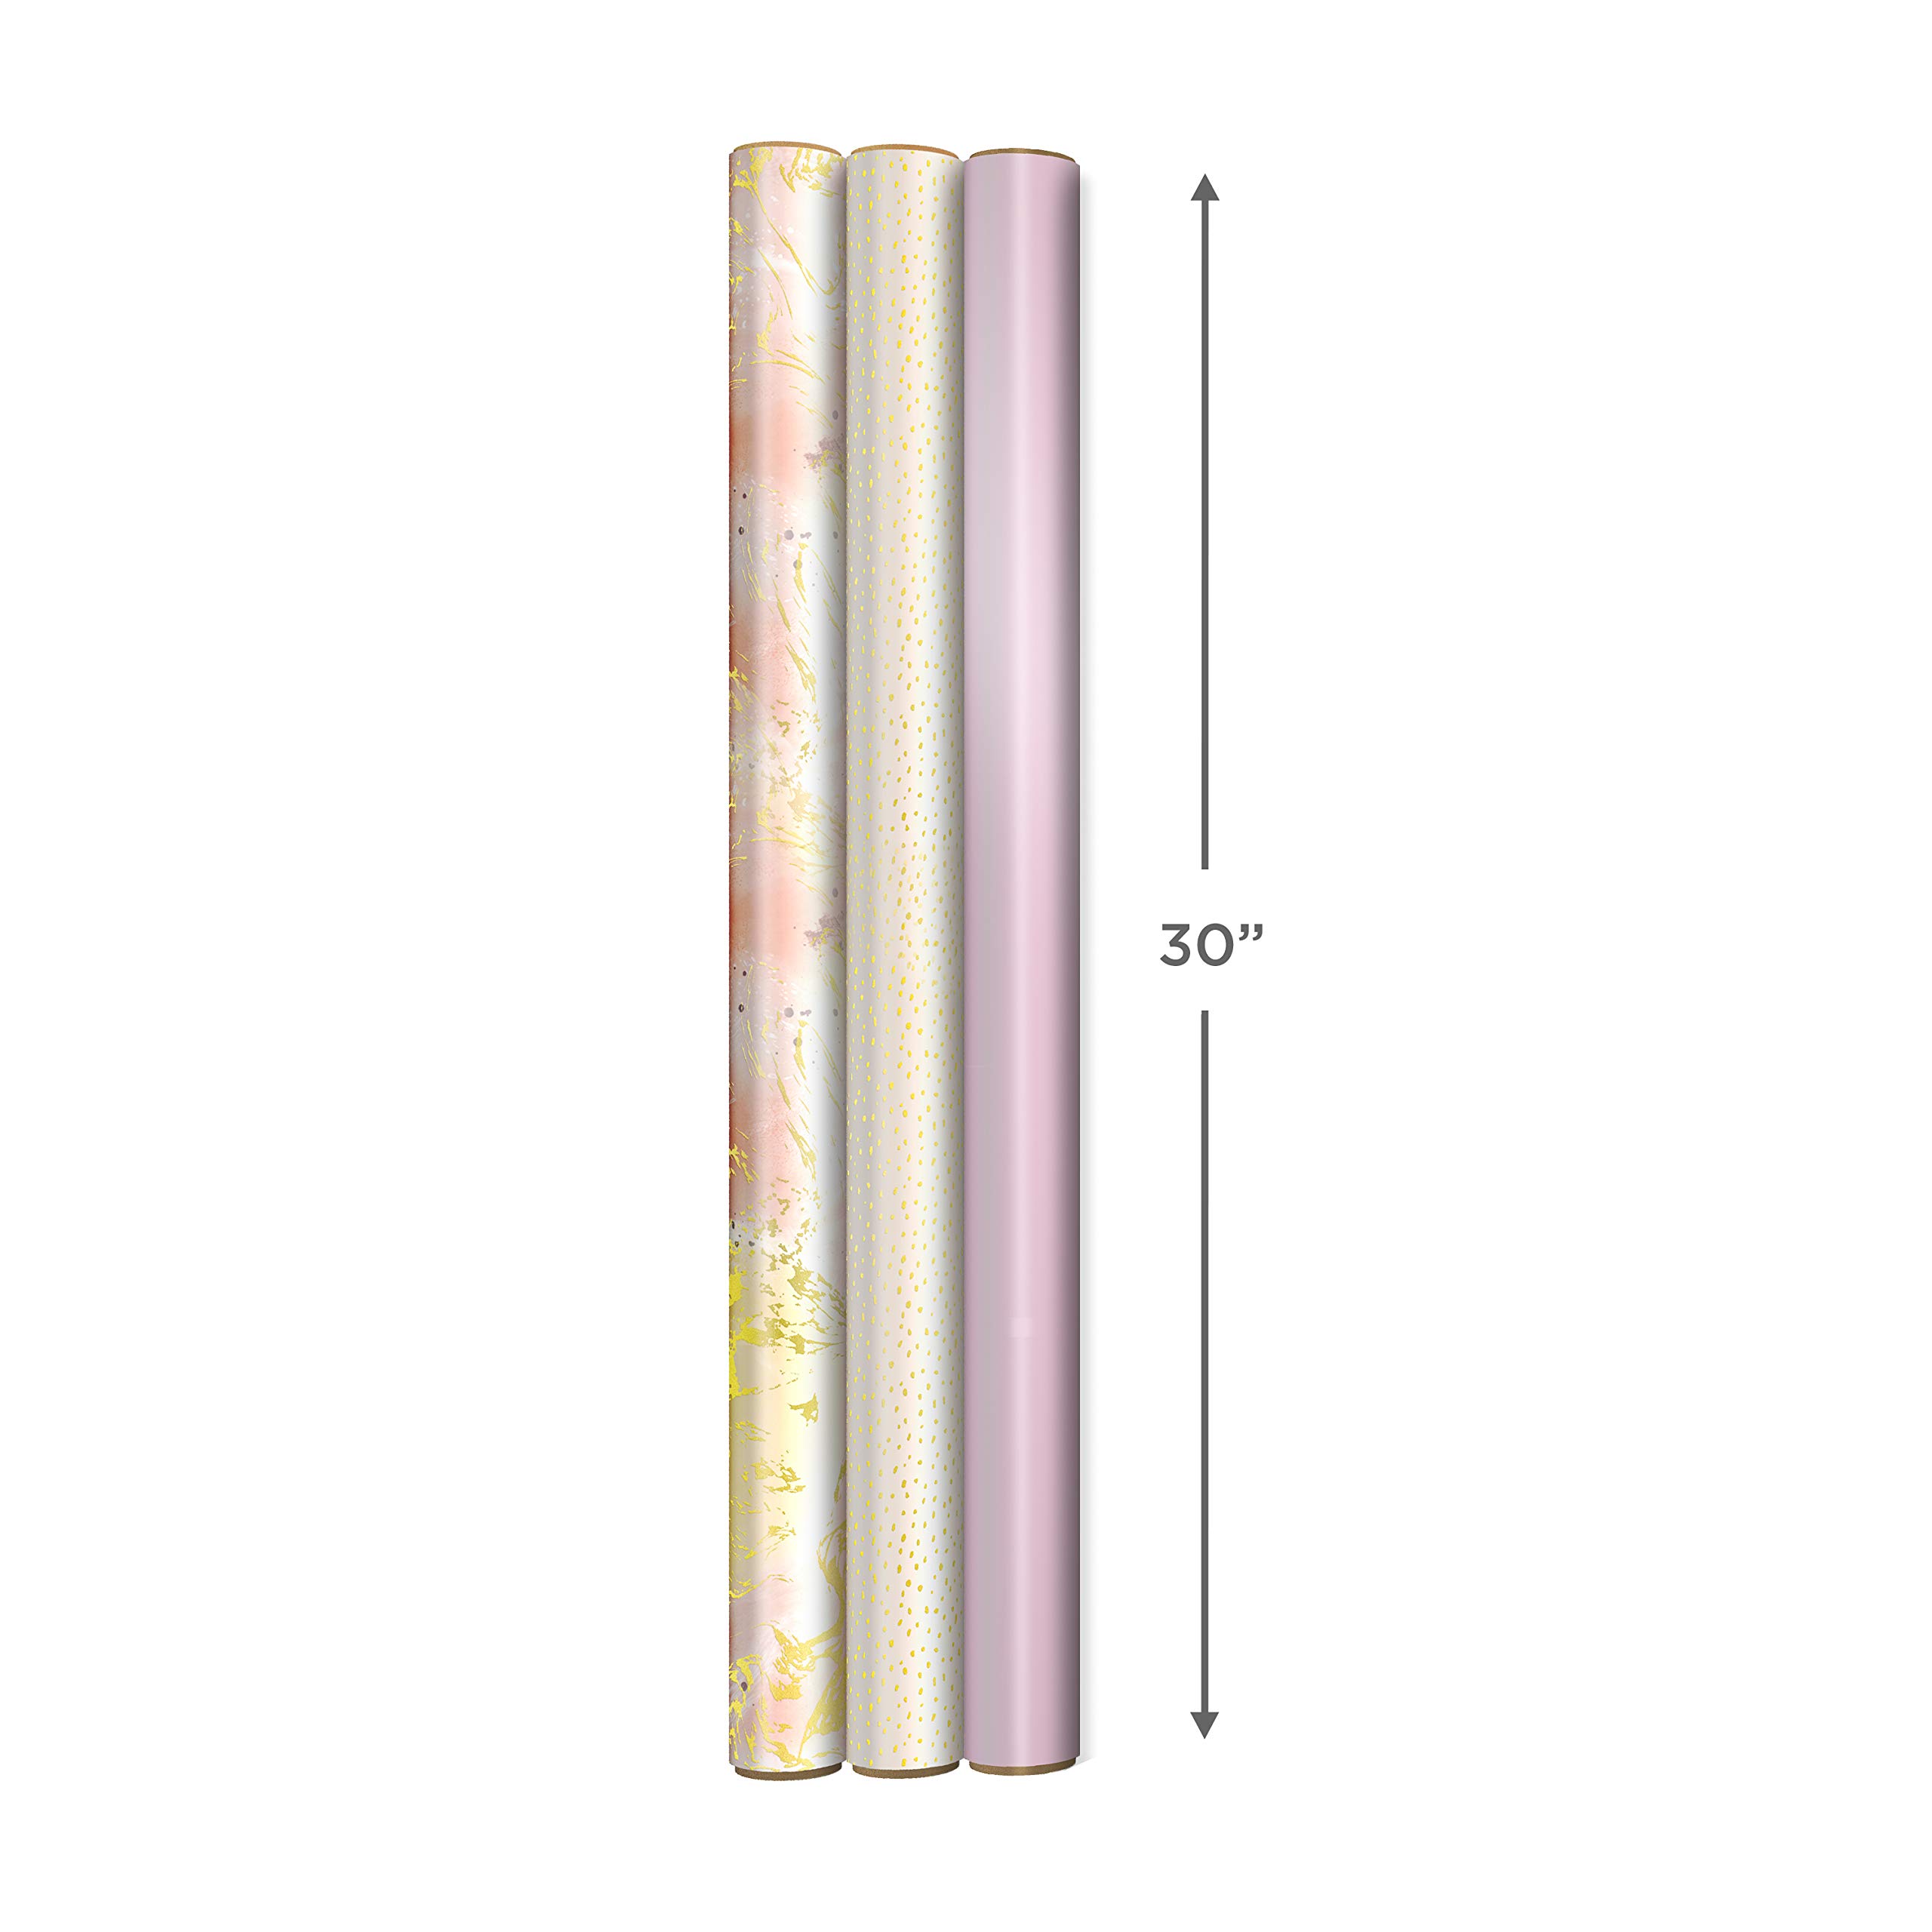 Hallmark Pink and Gold Wrapping Paper with Cutlines and Optional DIY Bow Templates on Reverse (3 Rolls: 75 sq. ft. ttl) for Christmas, Birthdays, Weddings, Bridal Showers, Baby Showers, Crafts